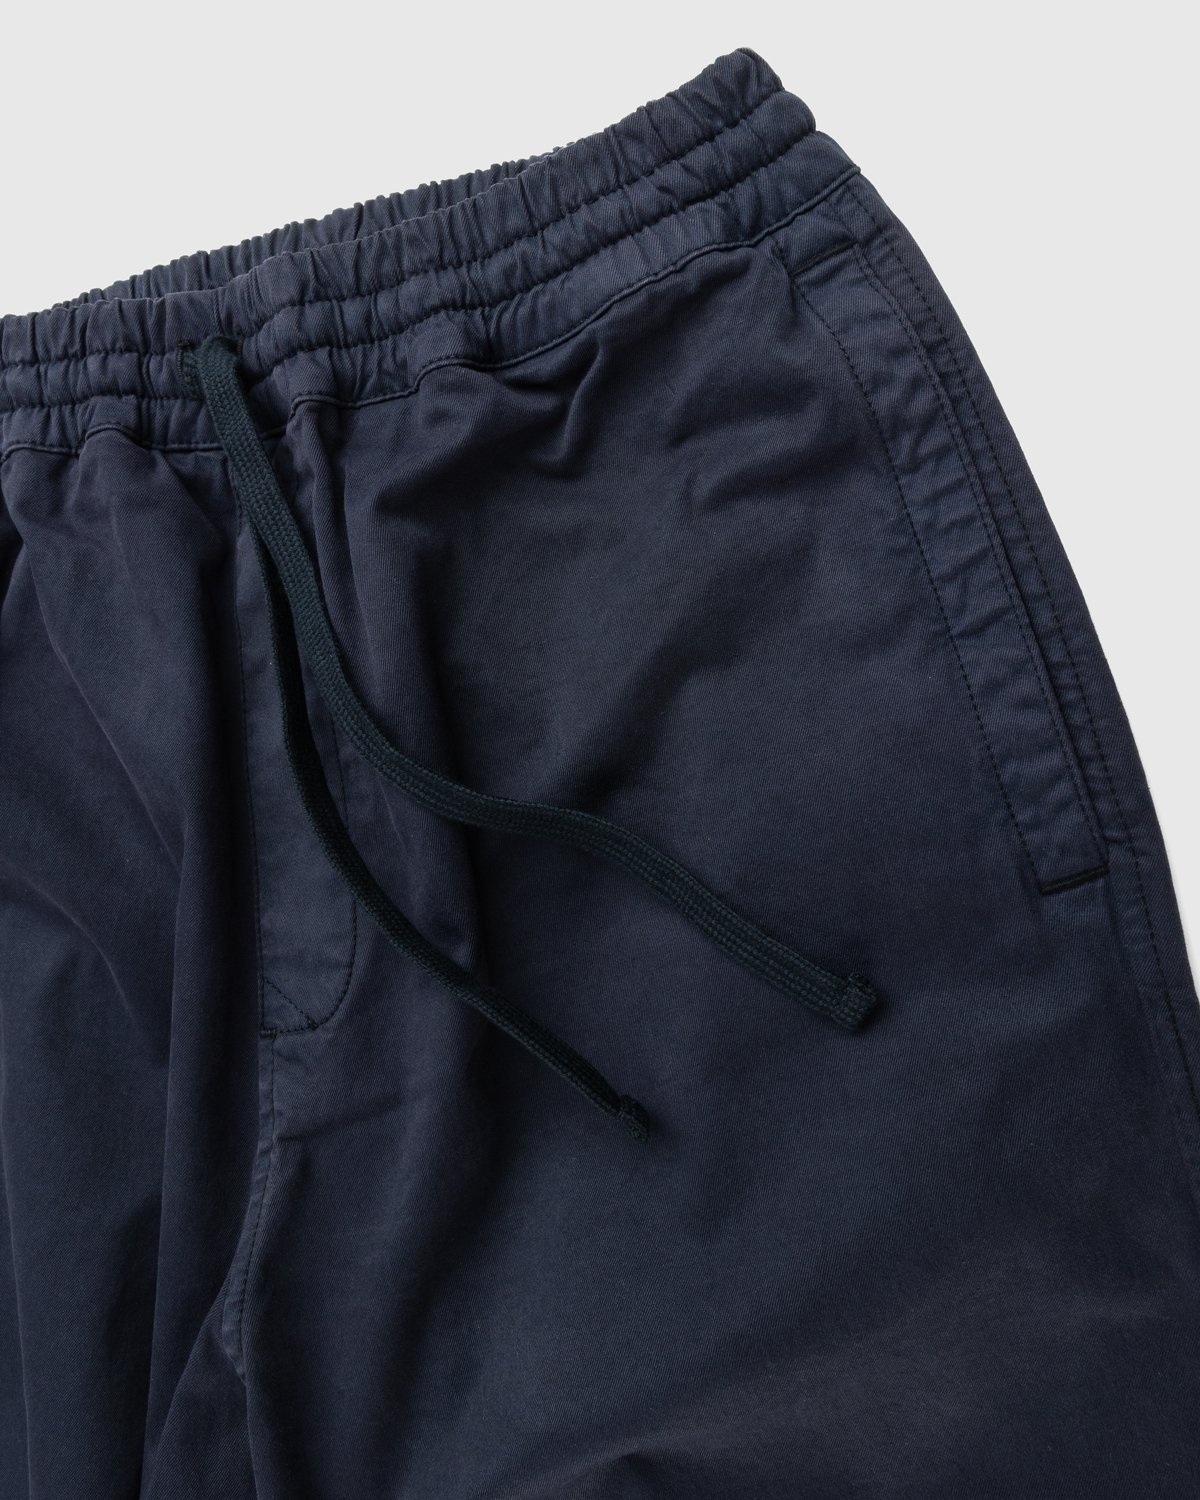 Carhartt WIP – Lawton Pant Navy - Trousers - Blue - Image 3